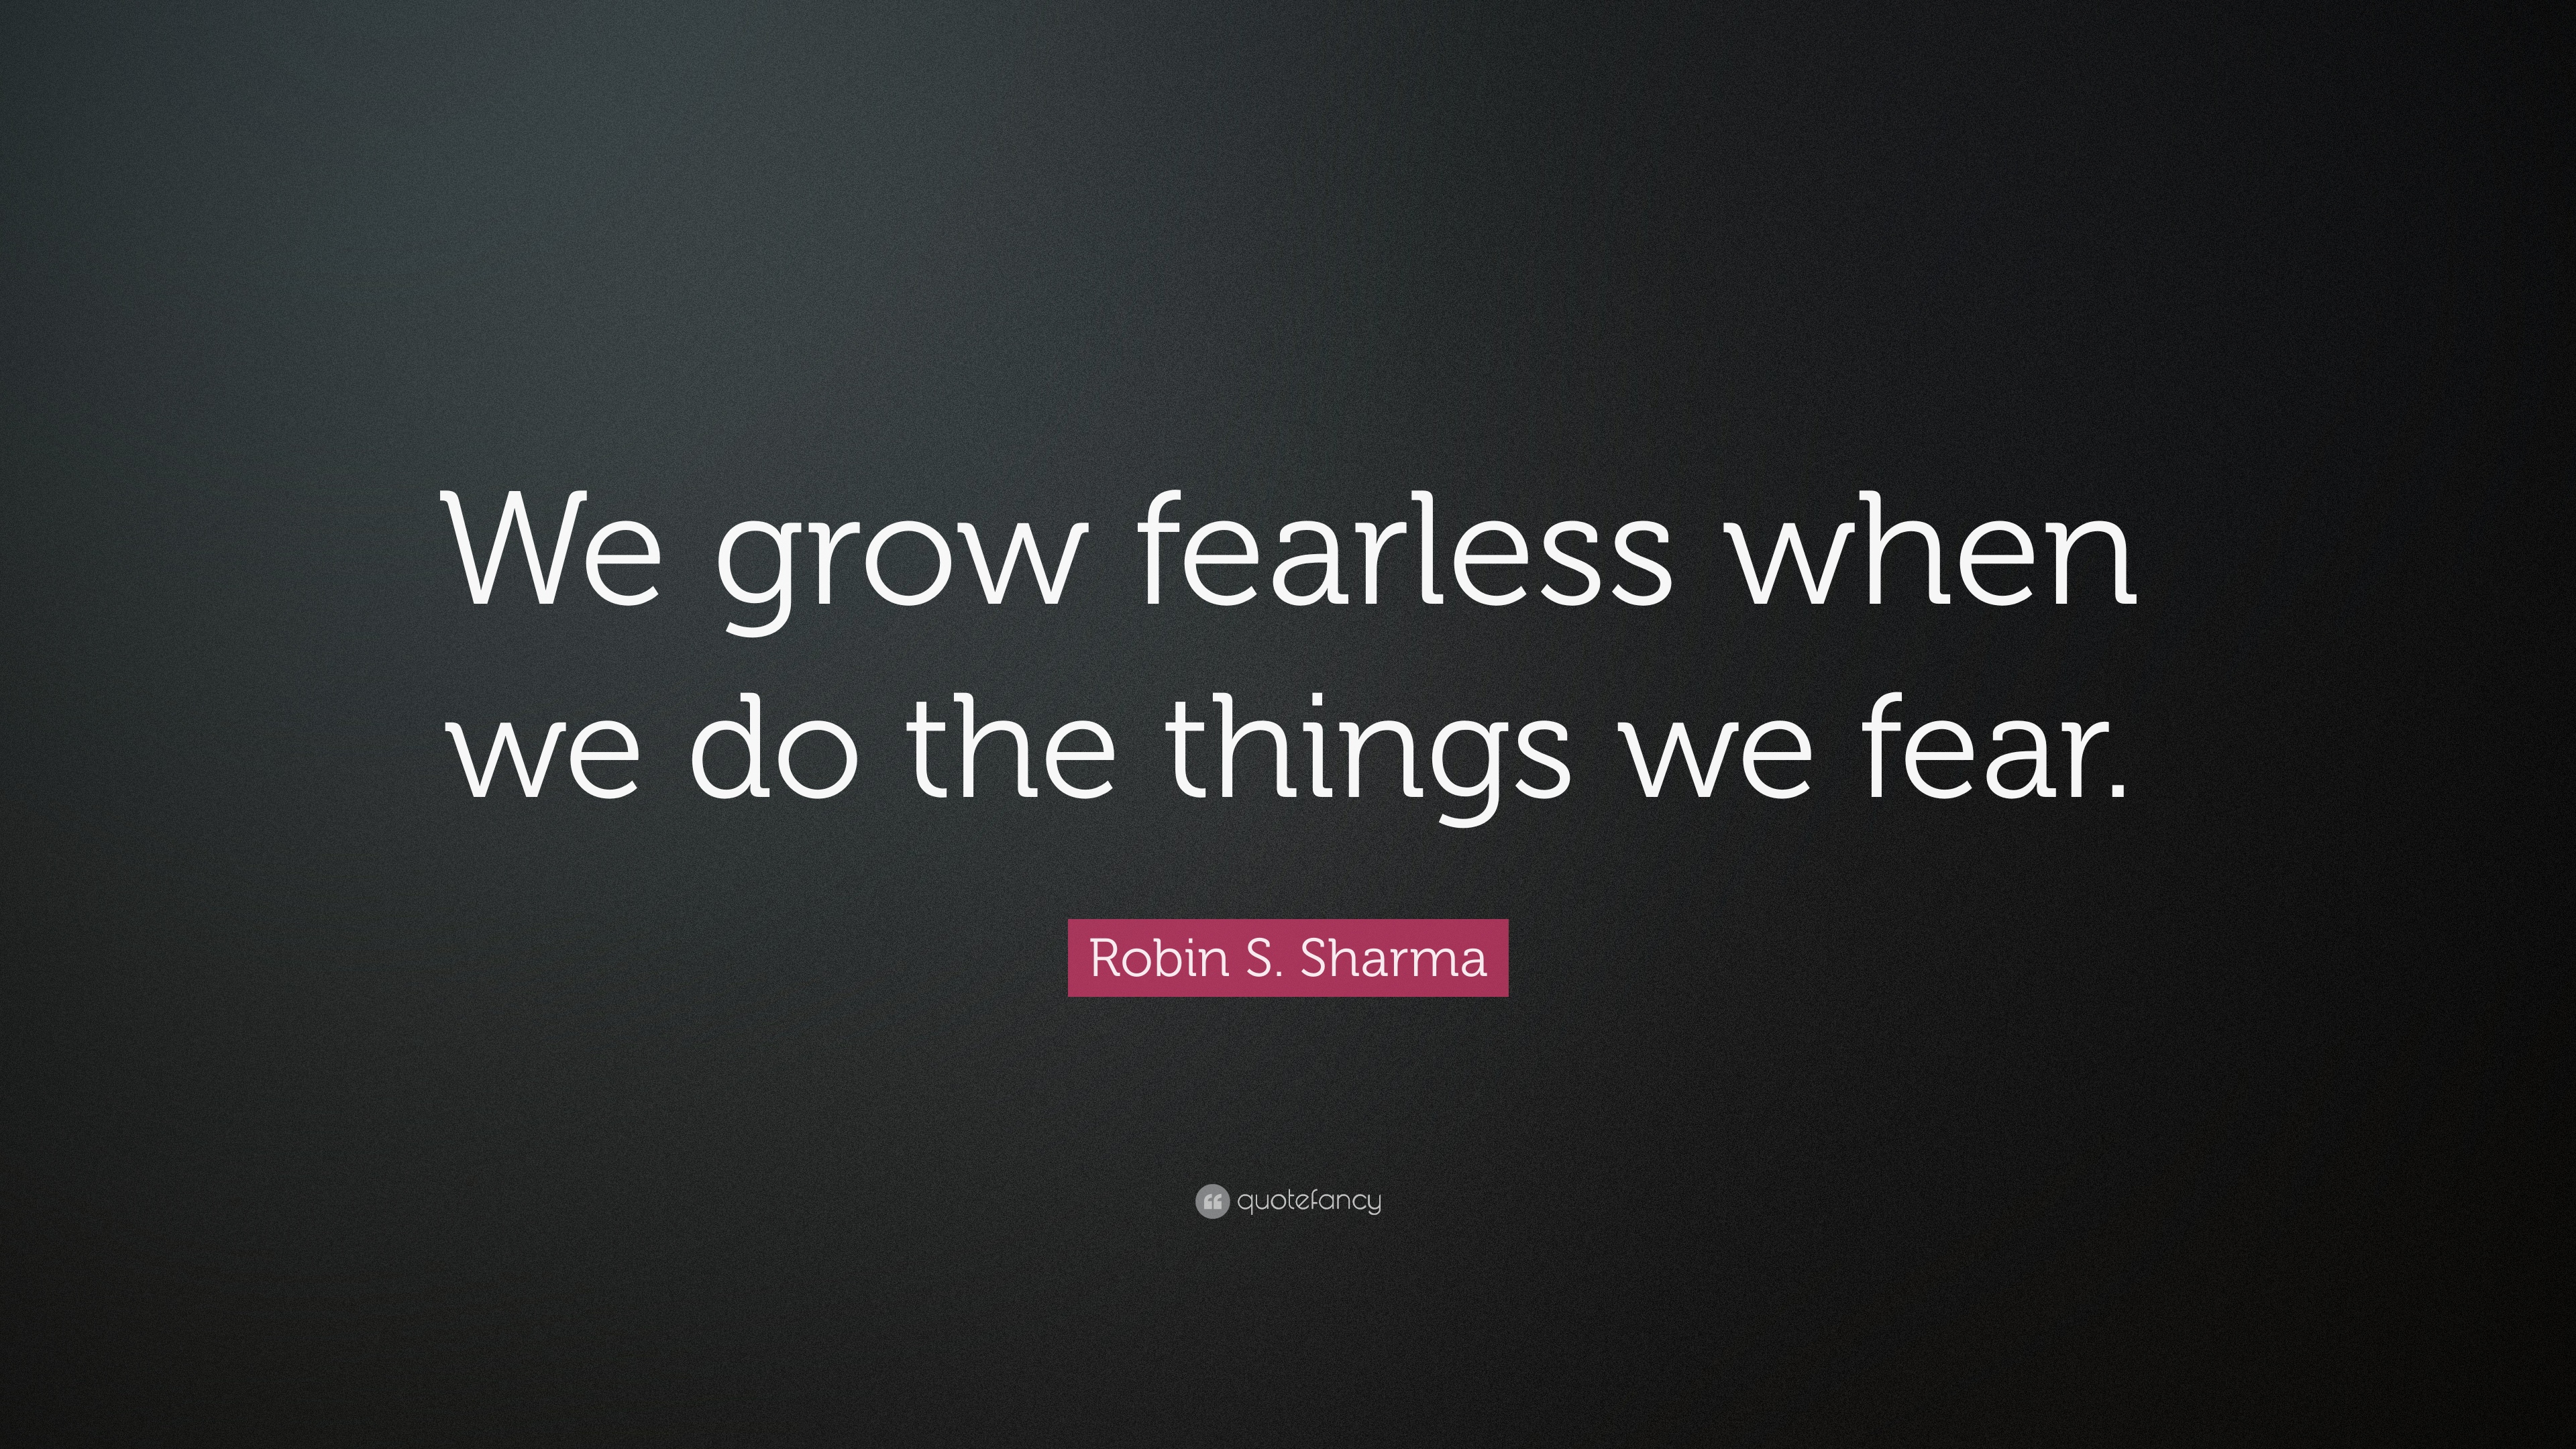 Robin S. Sharma Quote: “We grow fearless when we do the things we ...